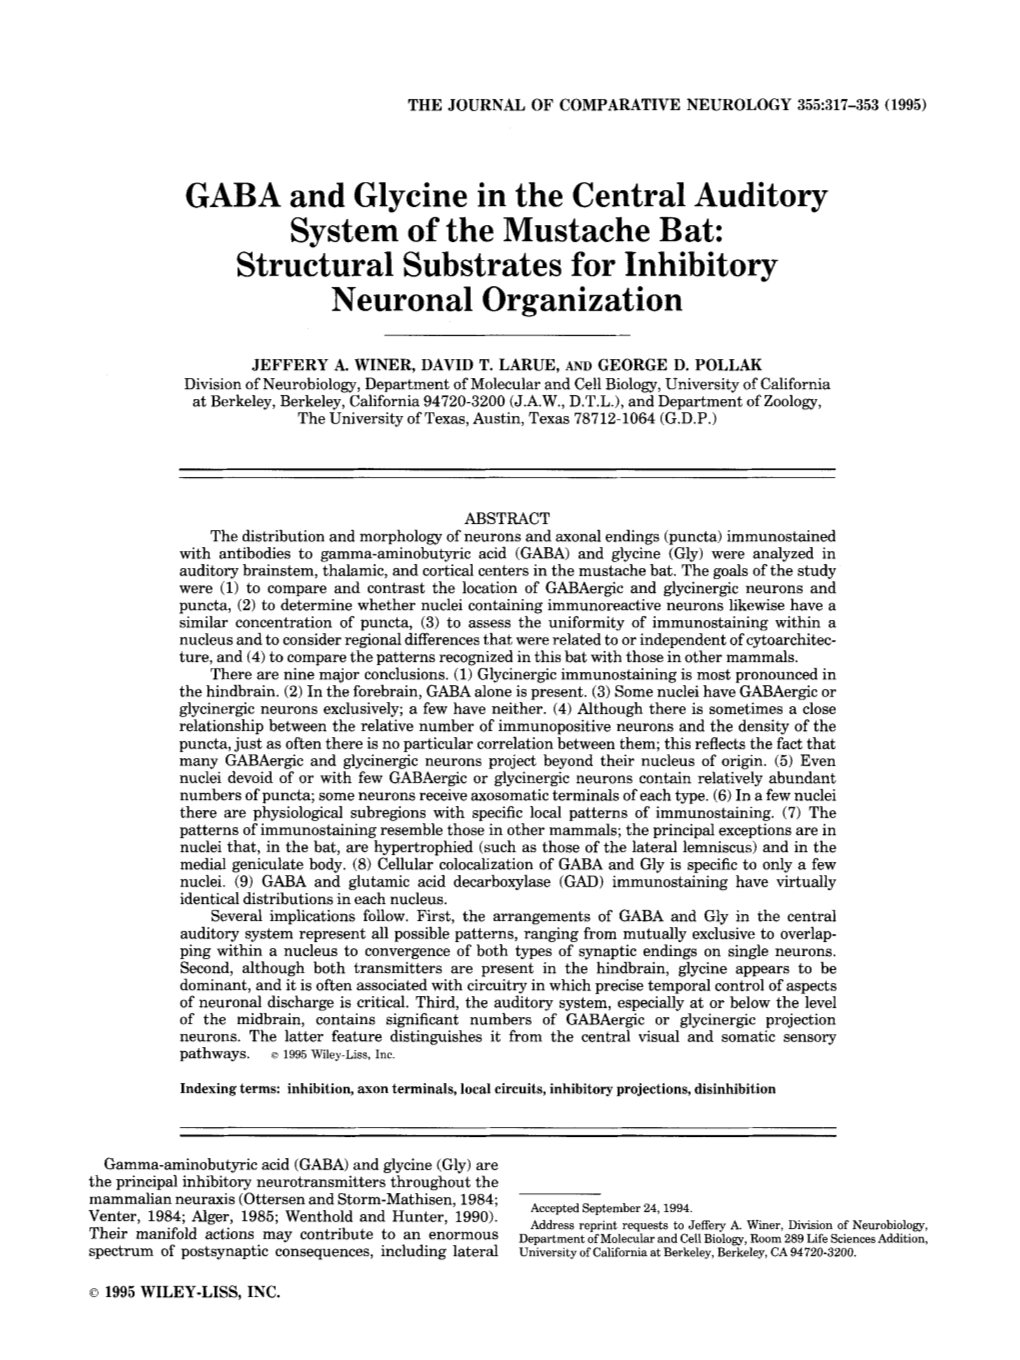 GABA and Glycine in the Central Auditory System of the Mustache Bat: Structural Substrates for Inhibitory Neuronal Organization